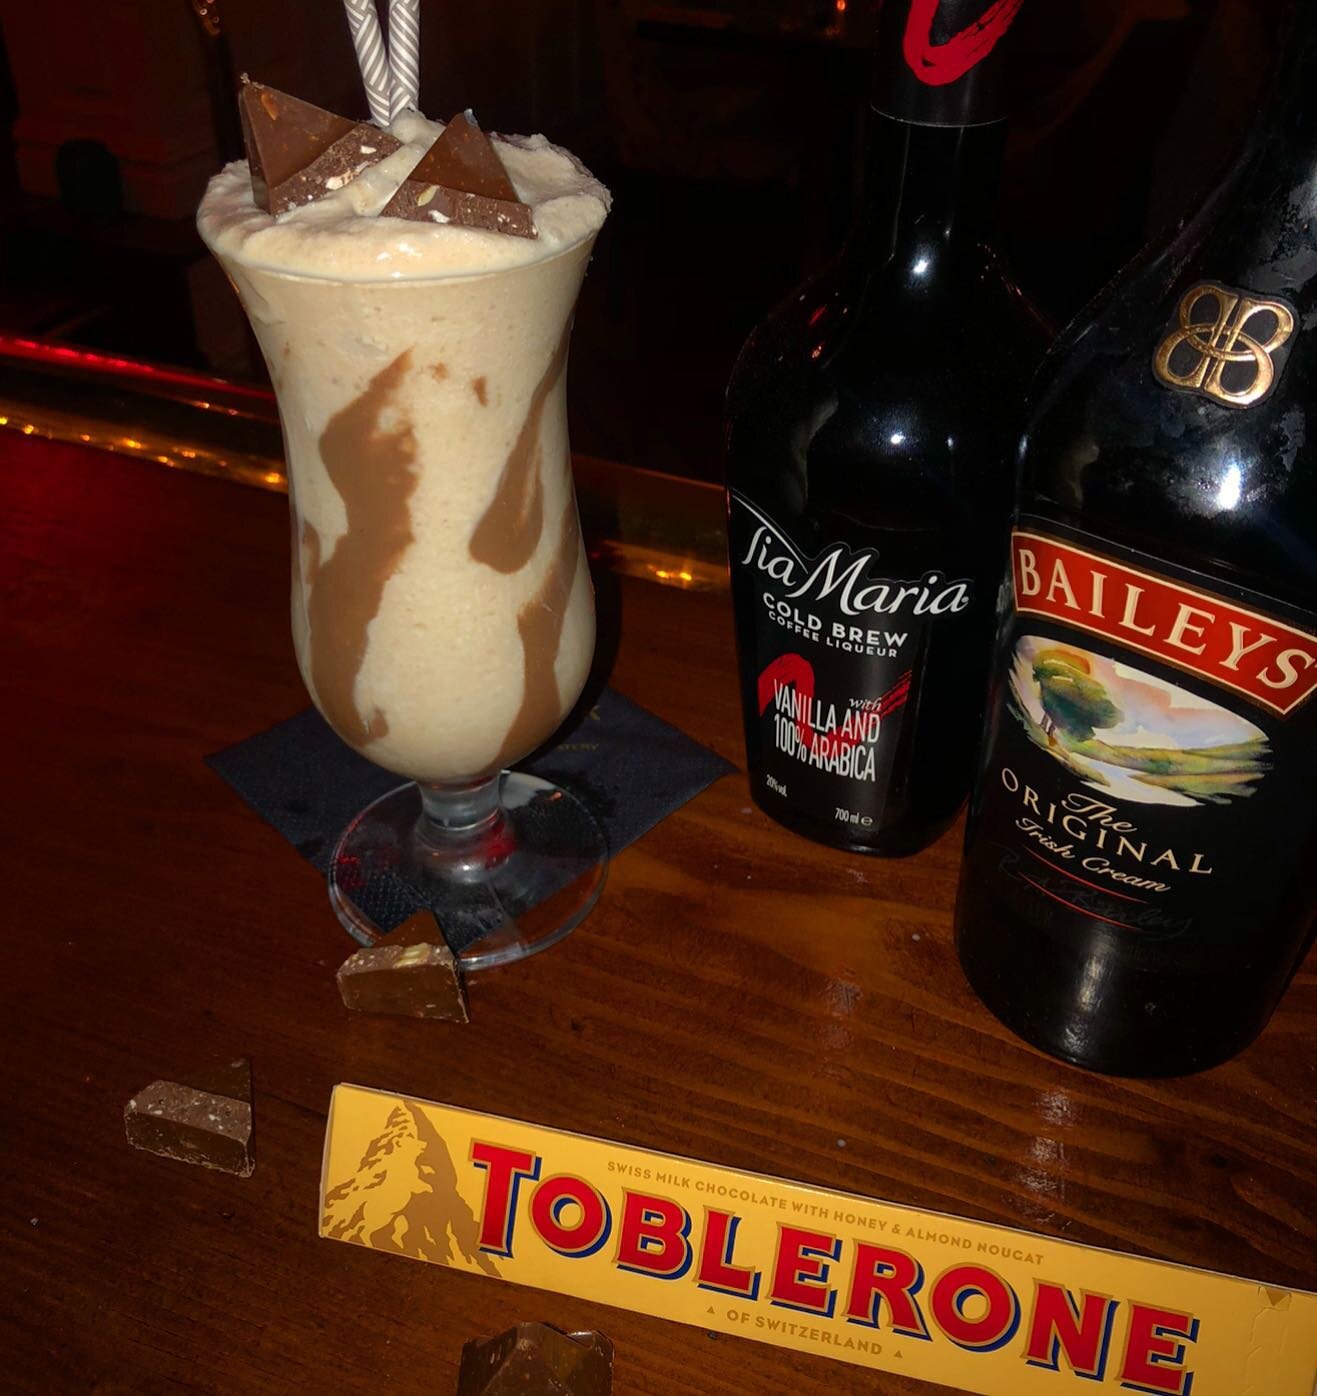 New Years is around the corner so it&rsquo;s time to put your home cocktail making skills to the test...
The Hole Toblerone - our beautiful blend of liquor, chocolate, cream and honey
Tastefully garnished with that chocolate bar that no one can resis